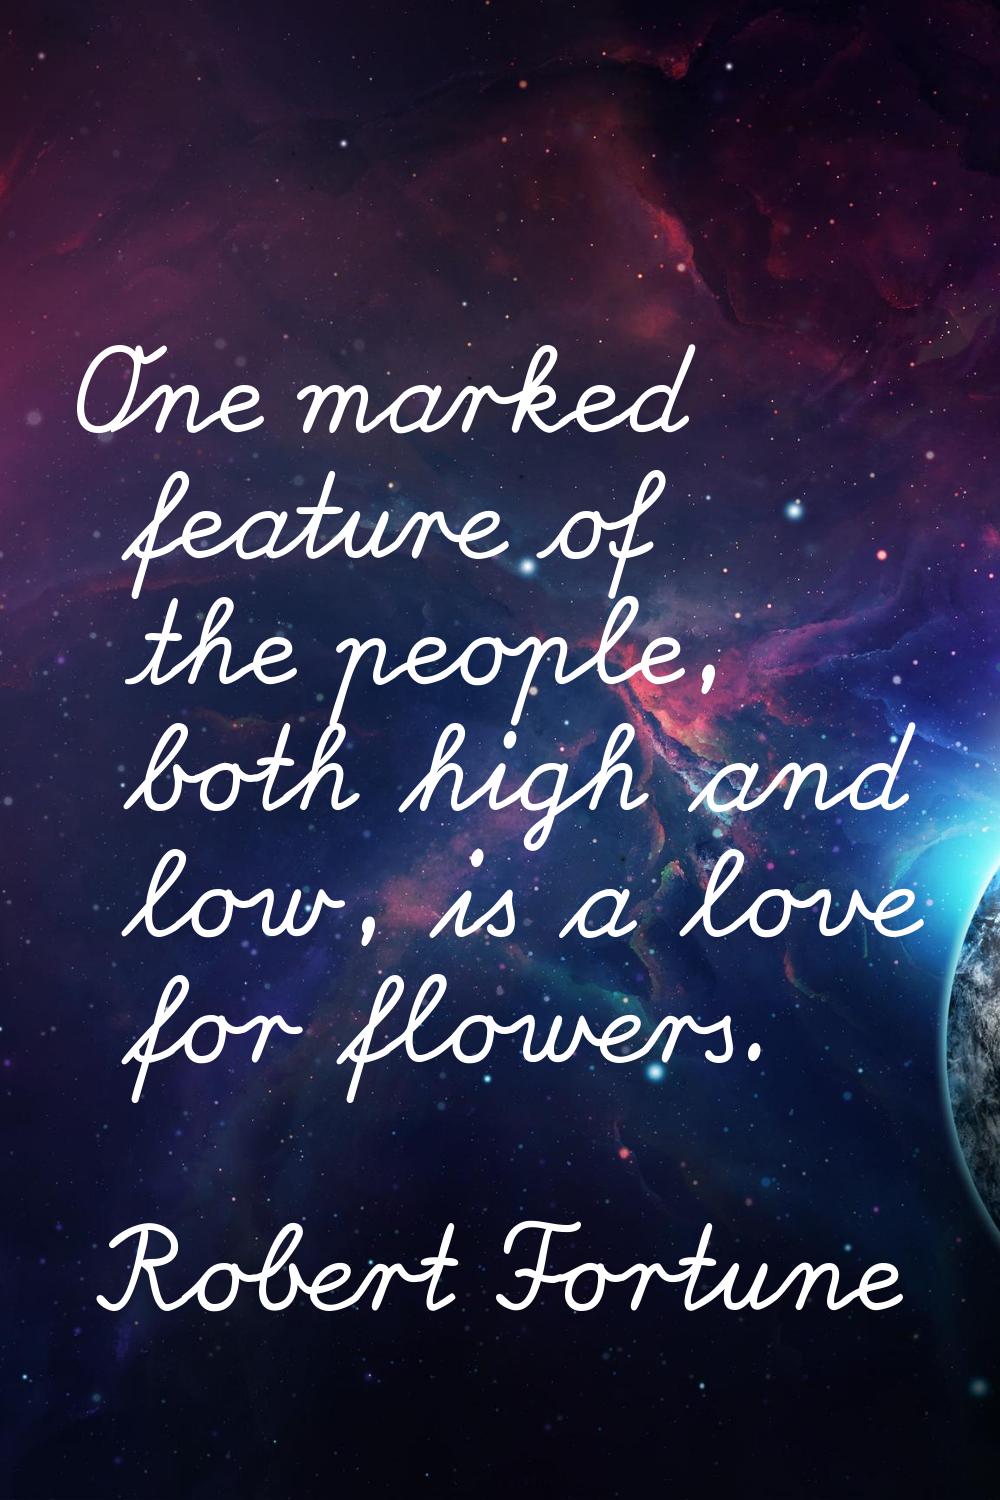 One marked feature of the people, both high and low, is a love for flowers.